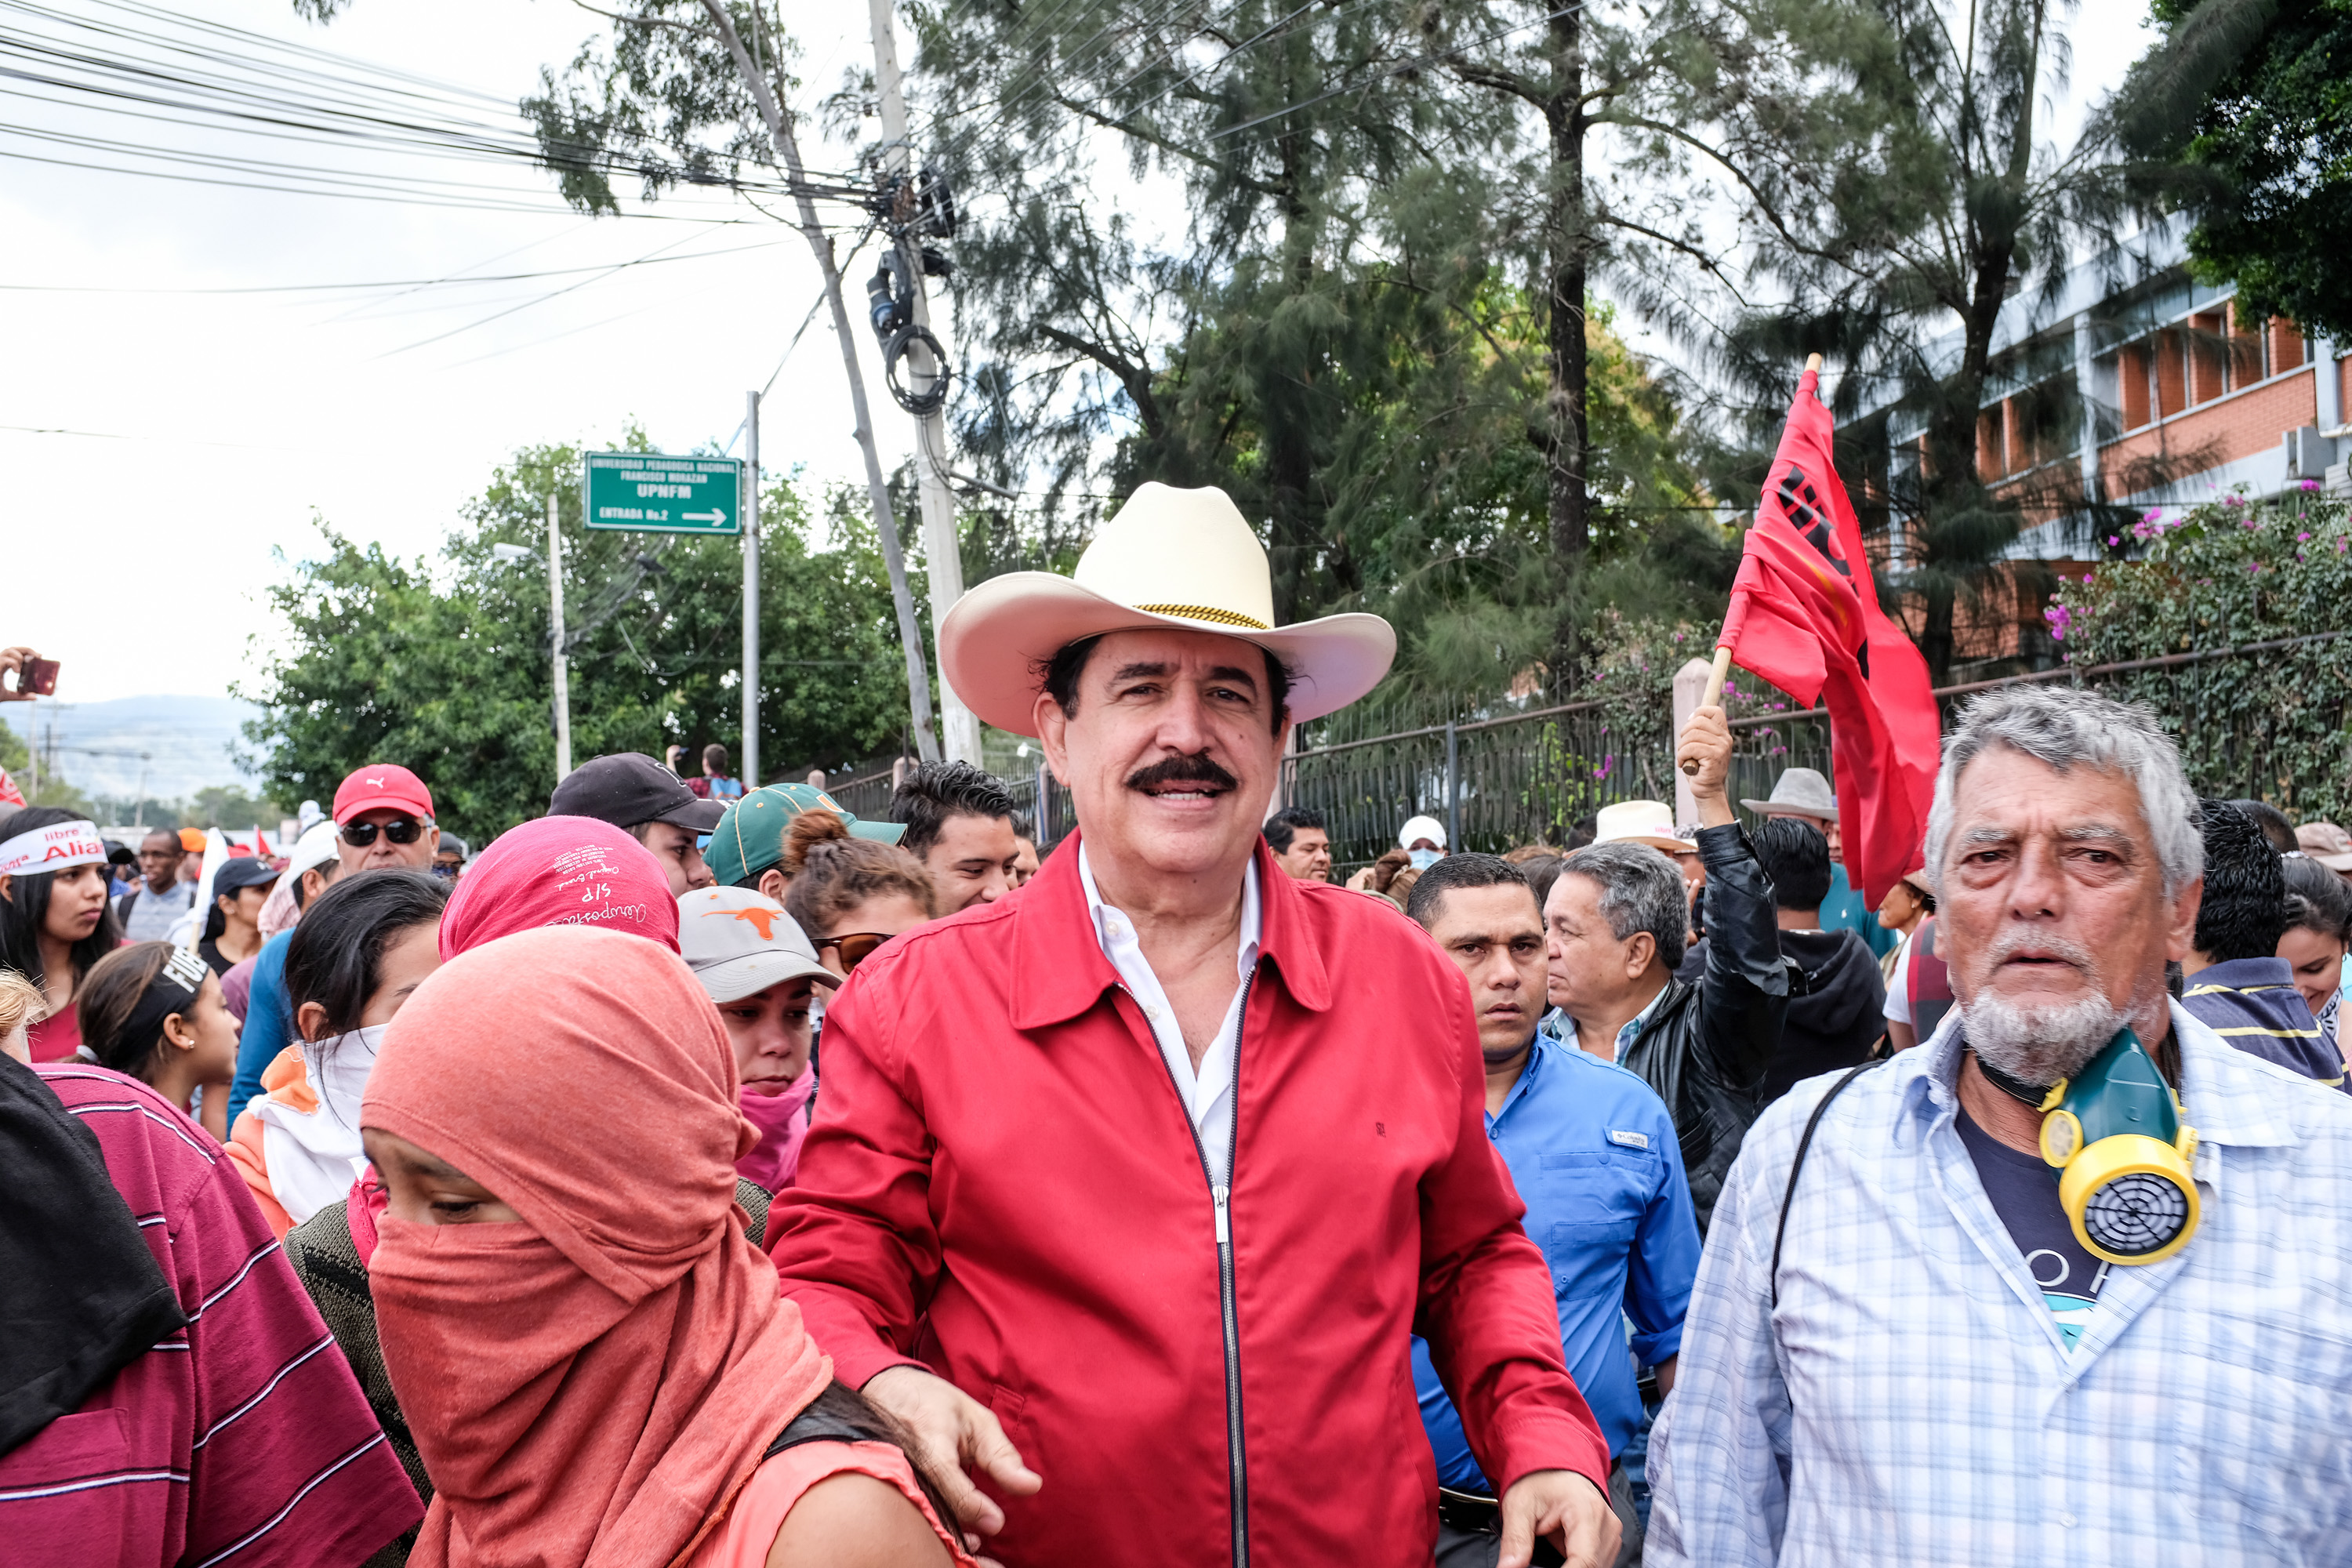 Manuel Zelaya surrounded by his supporters at a protest.